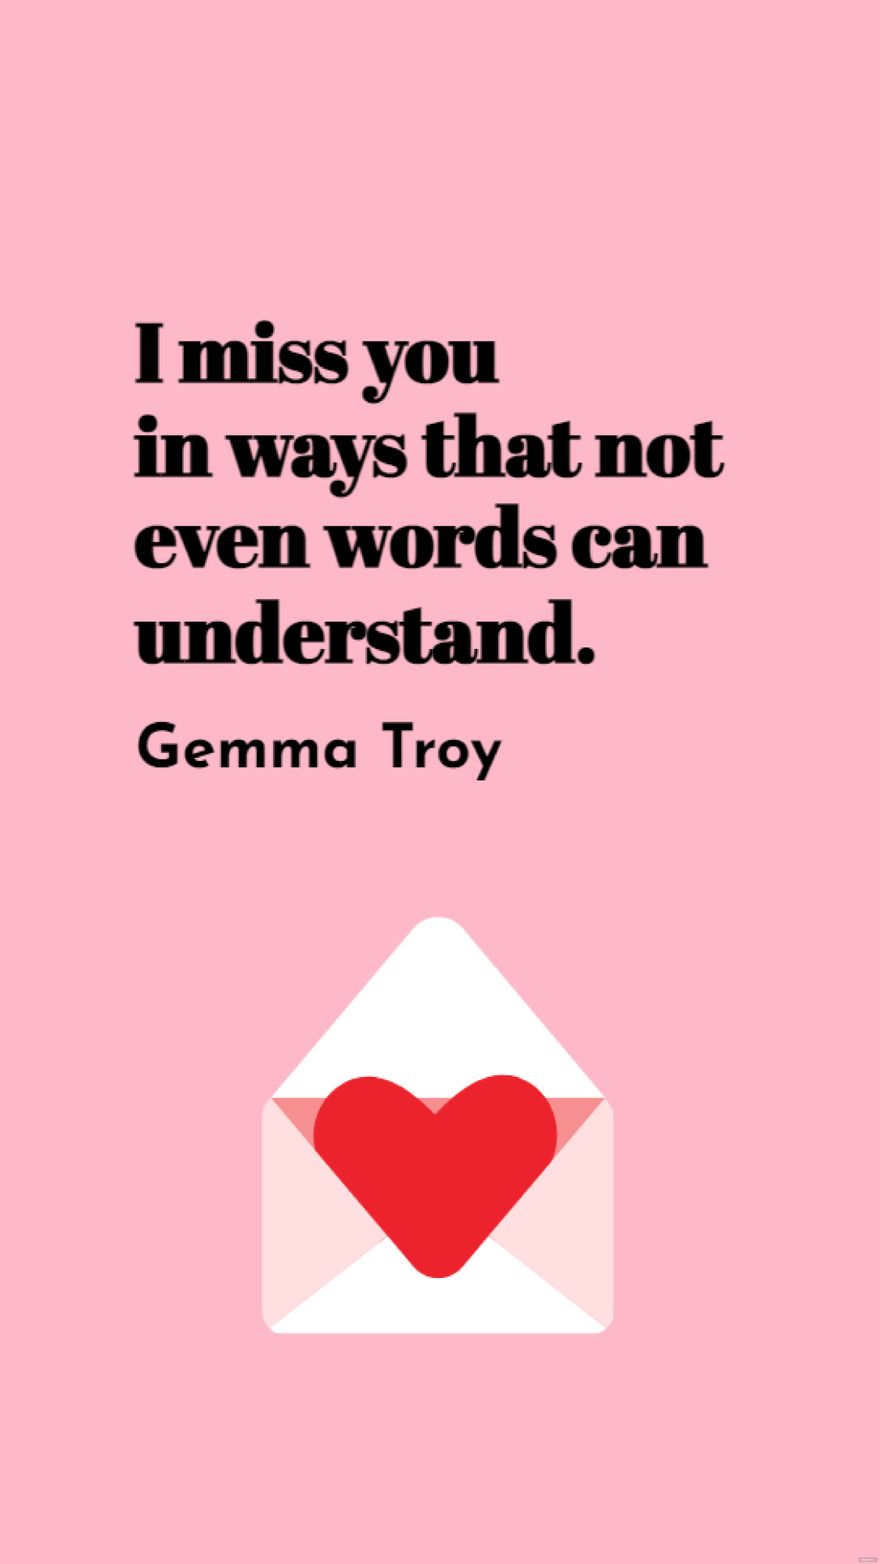 Gemma Troy - I miss you in ways that not even words can understand.